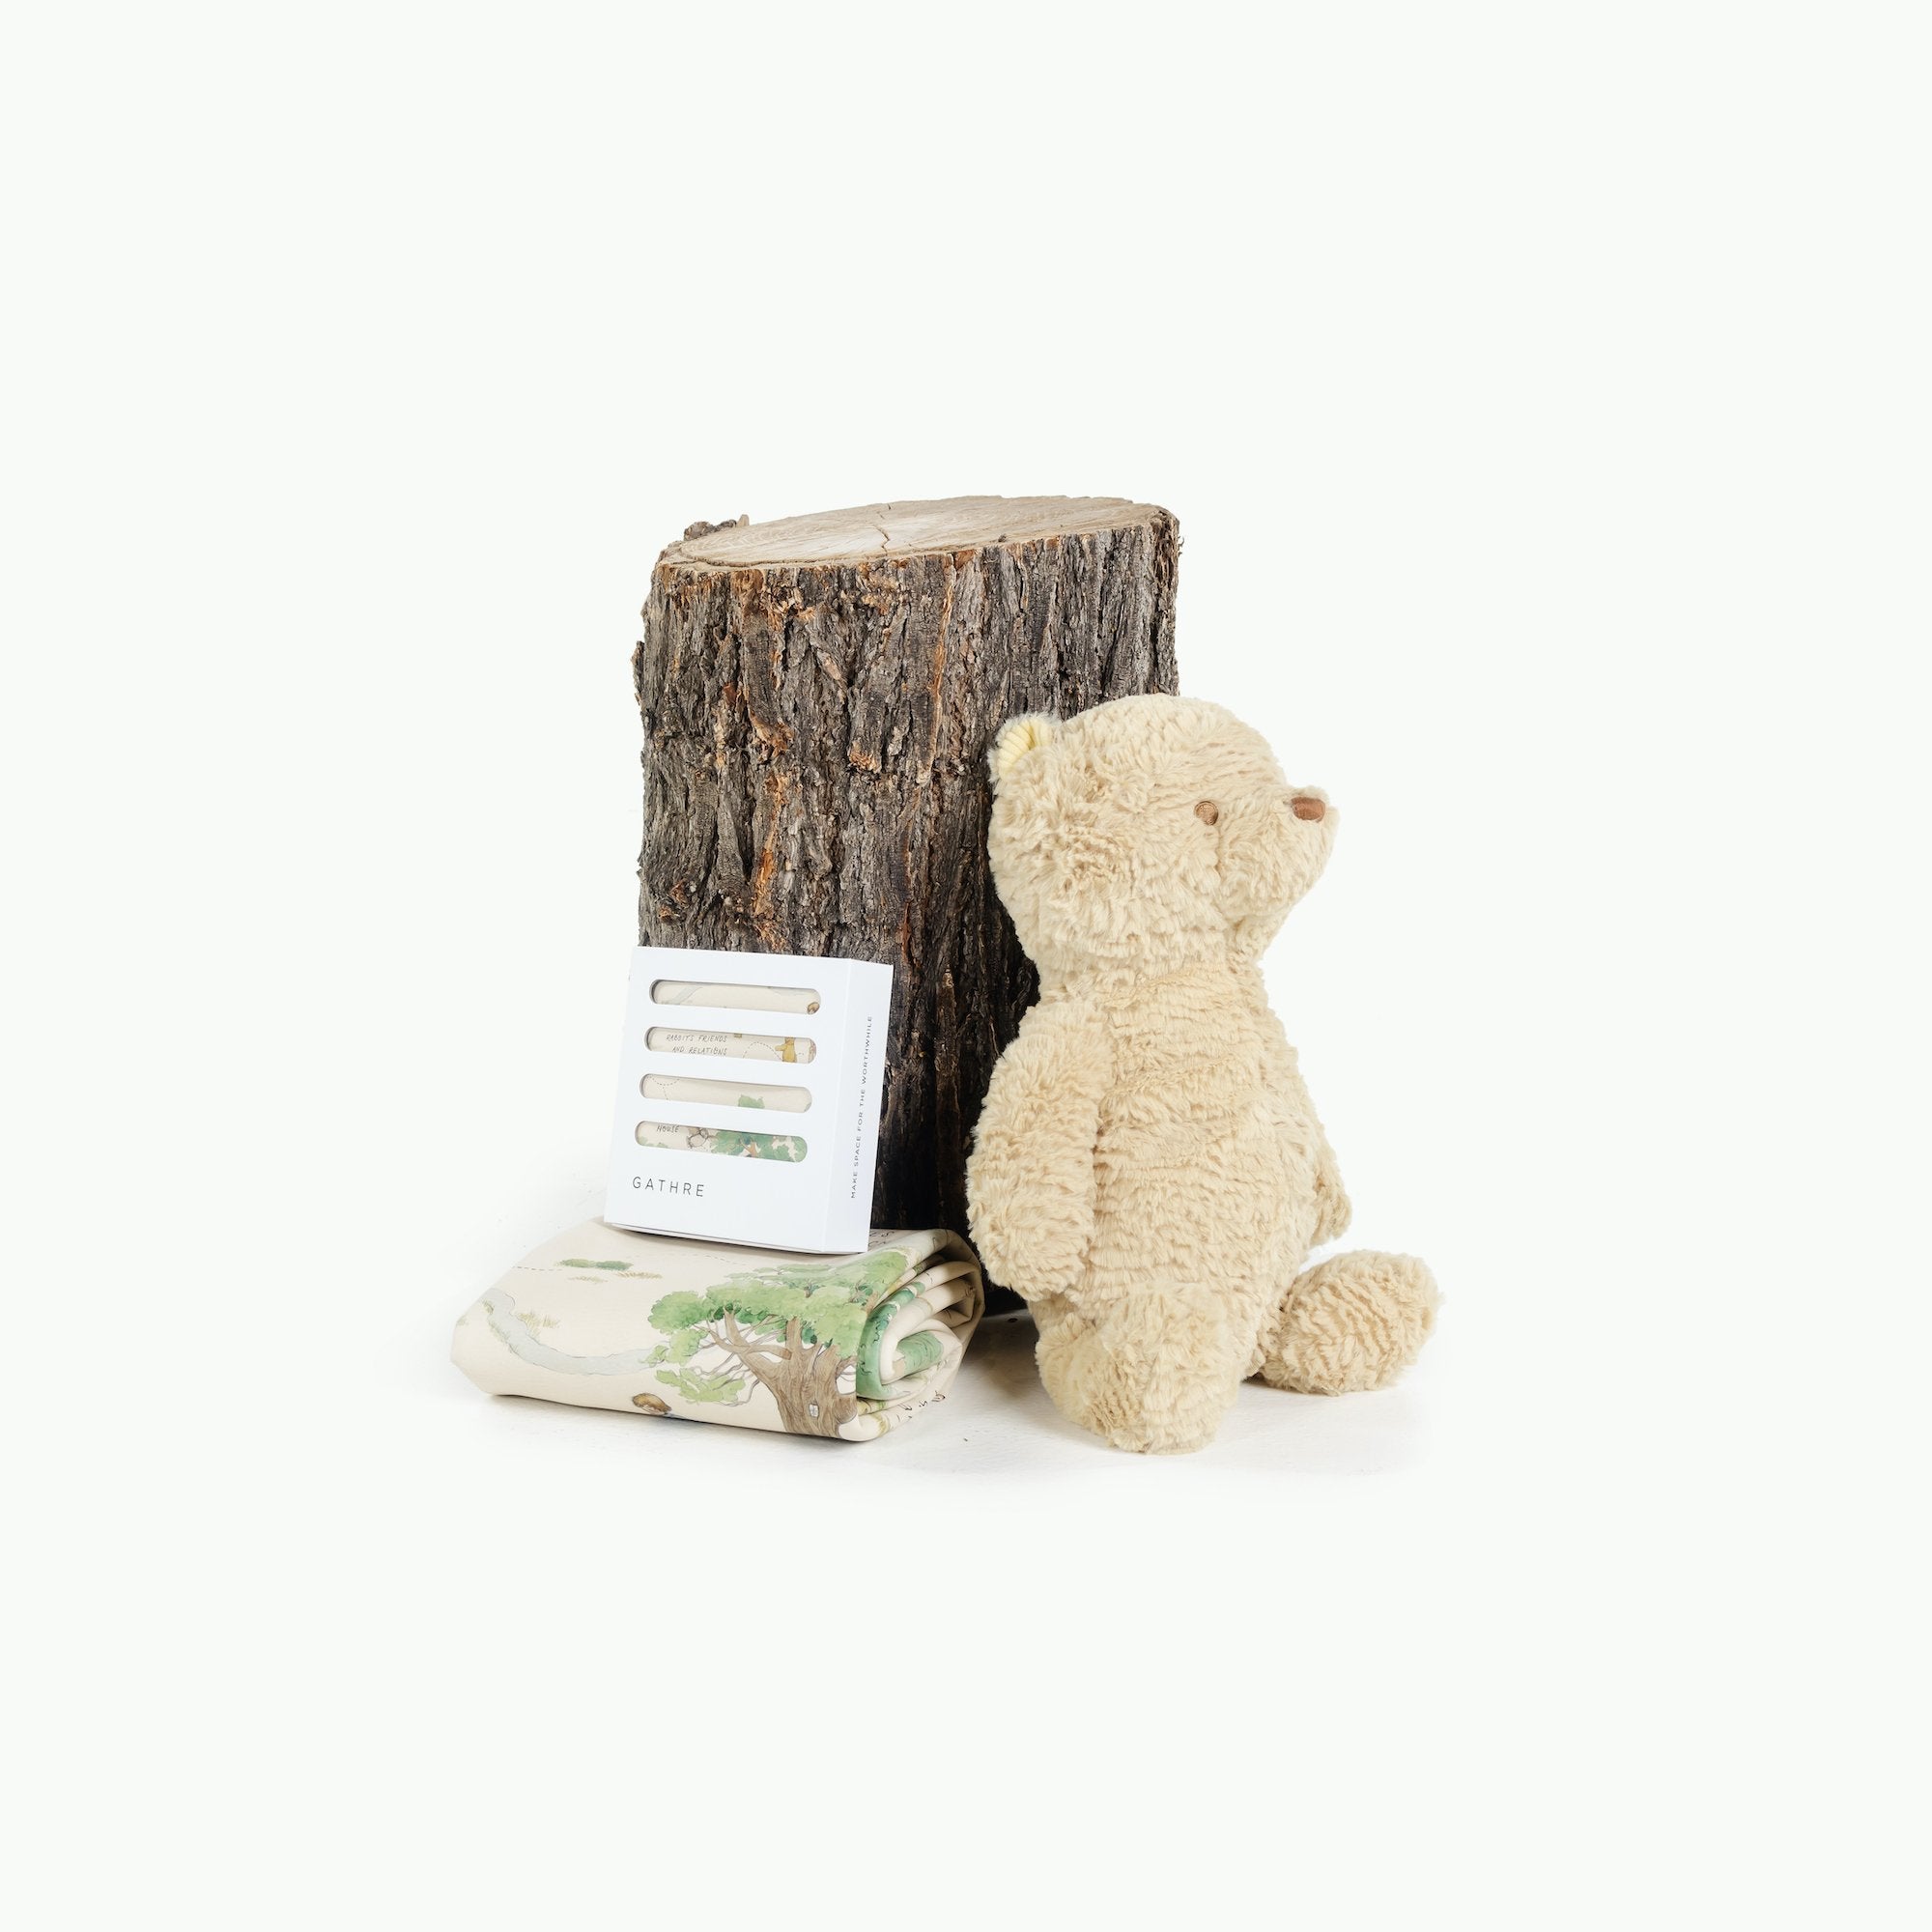 Hundred Acre Wood (on sale)@Hundred Acre Wood Micro Mat next to a log and teddy bear